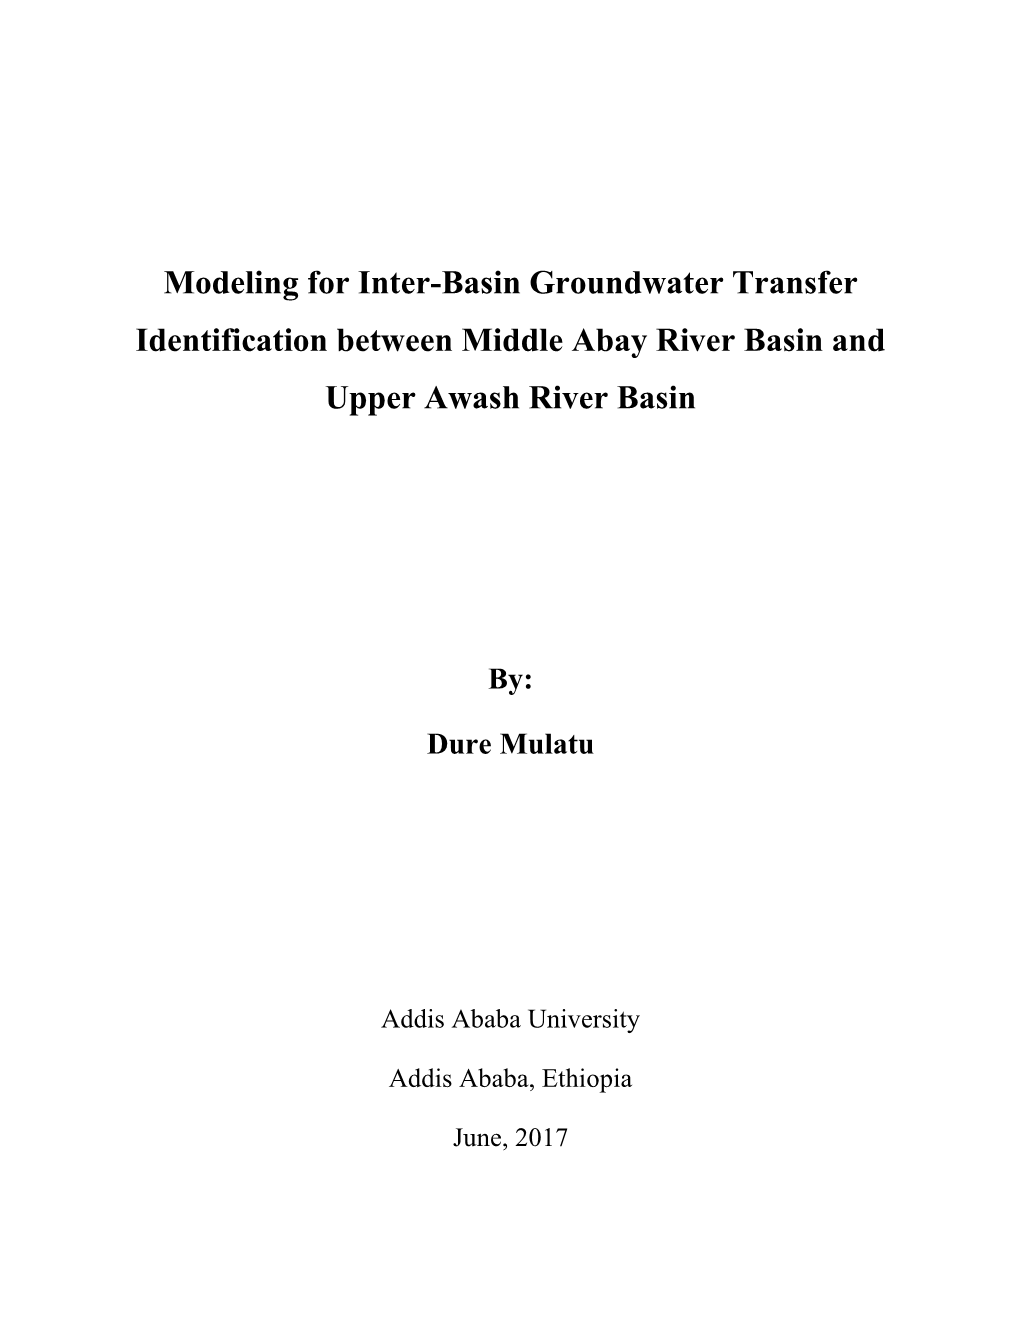 Modeling for Inter-Basin Groundwater Transfer Identification Between Middle Abay River Basin and Upper Awash River Basin